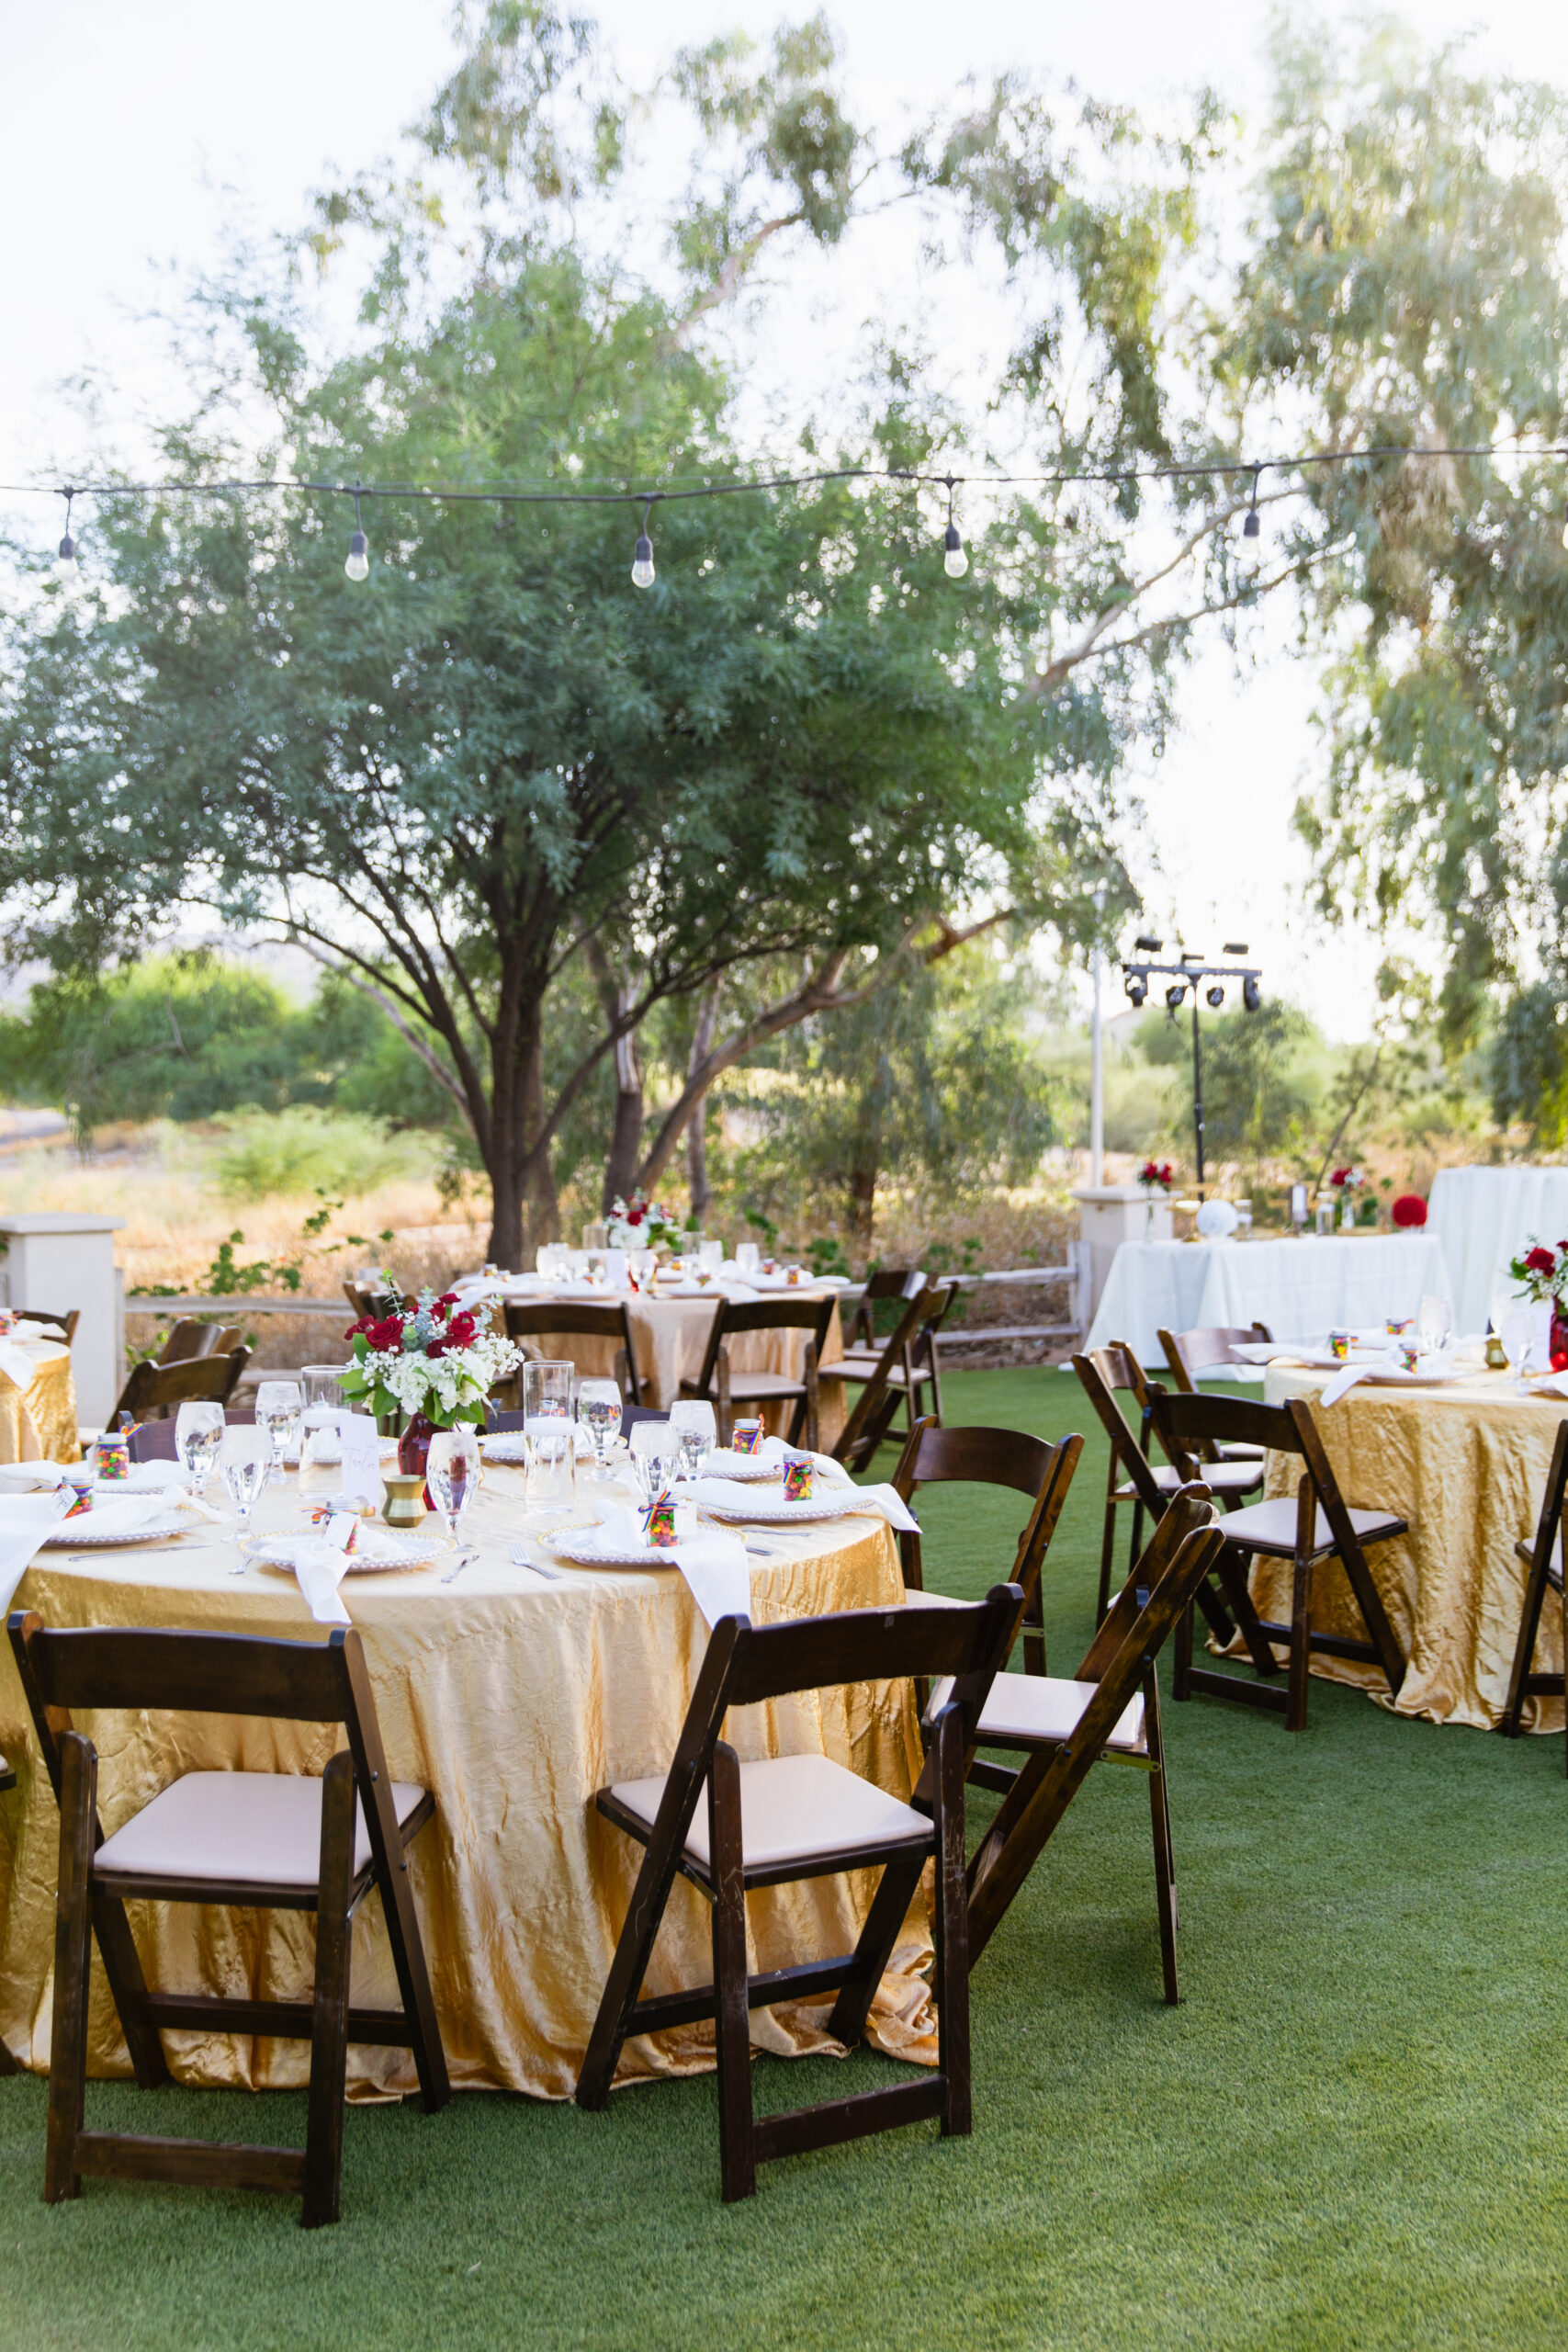 Elegant outdoor reception decorations at intimate desert wedding reception by Phoenix wedding photographer Juniper and Co Photography.